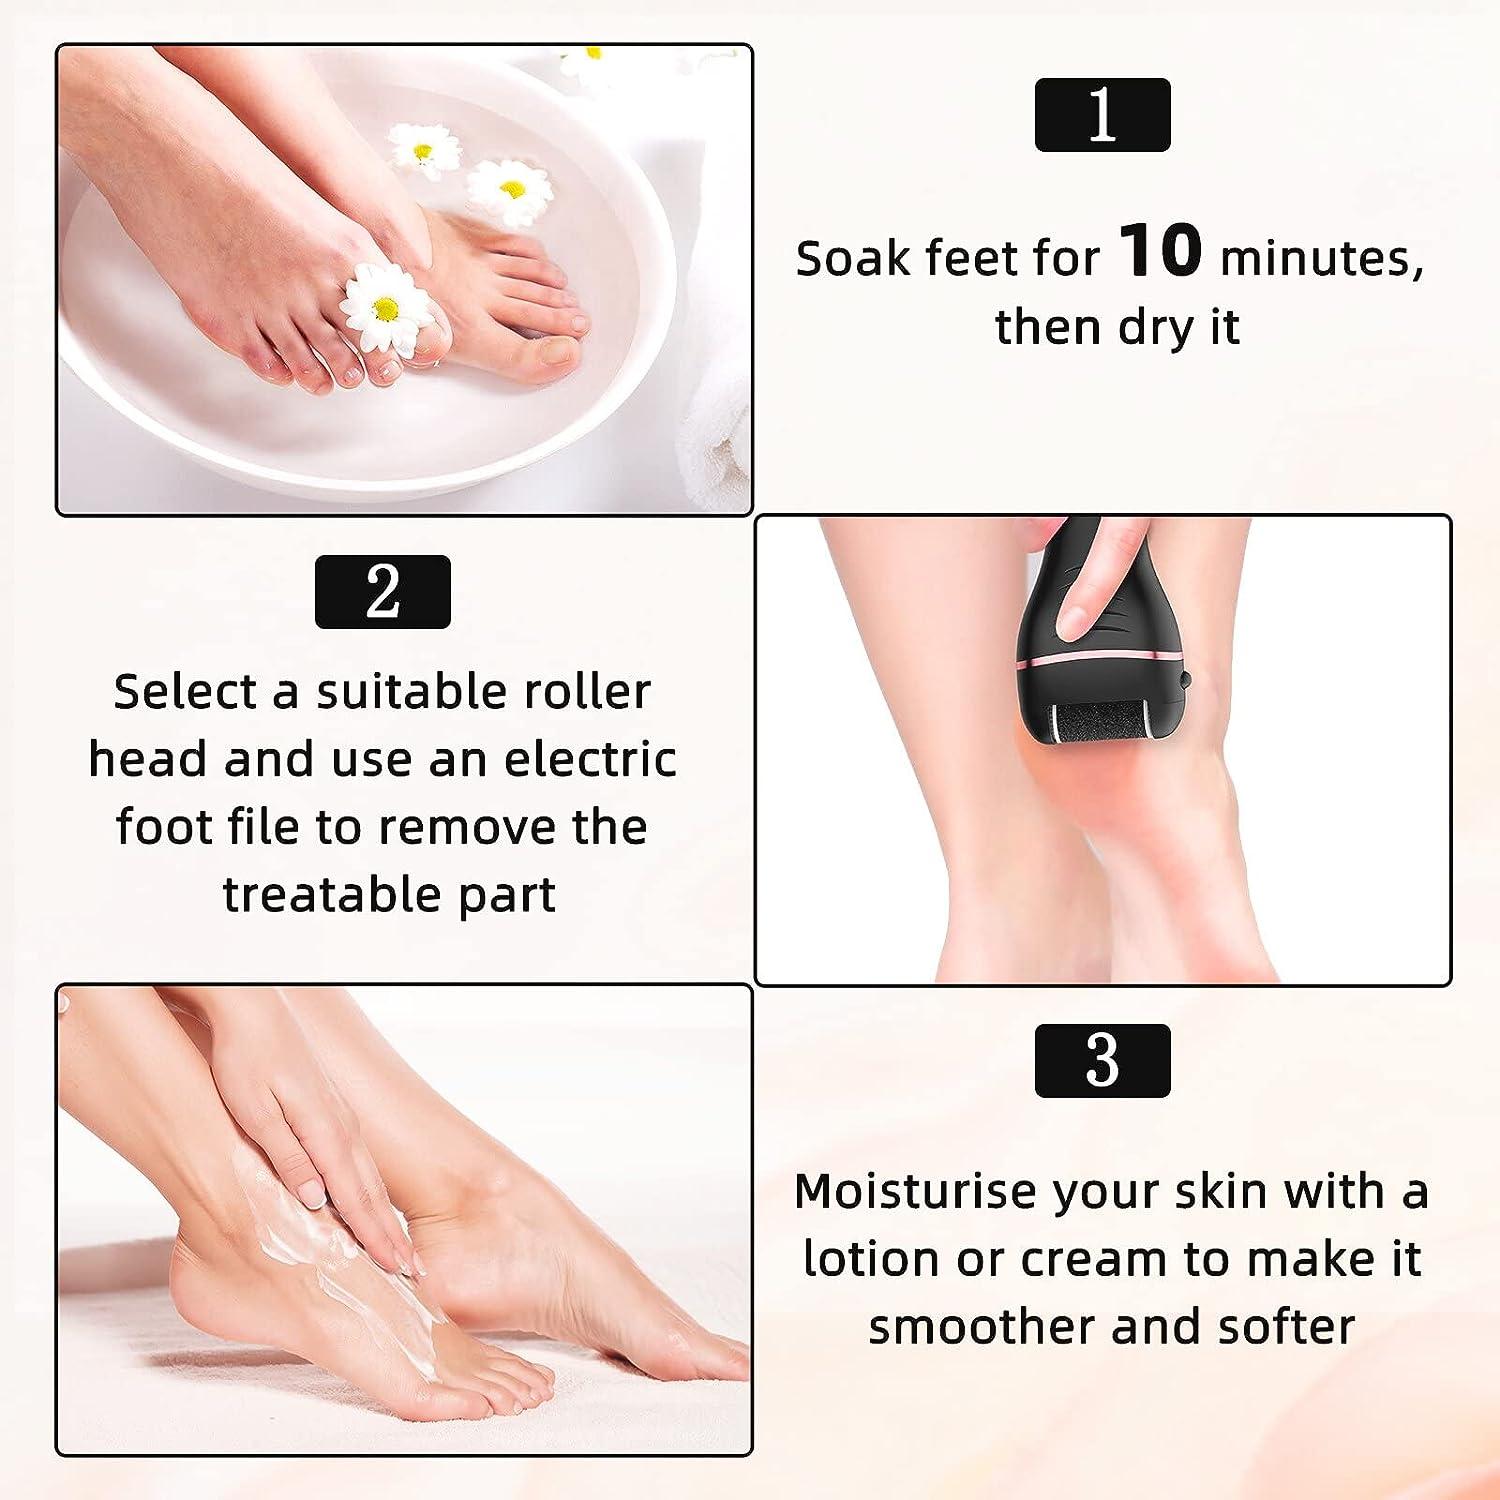 Electric Foot Scrubber for Dead Skin, For Personal